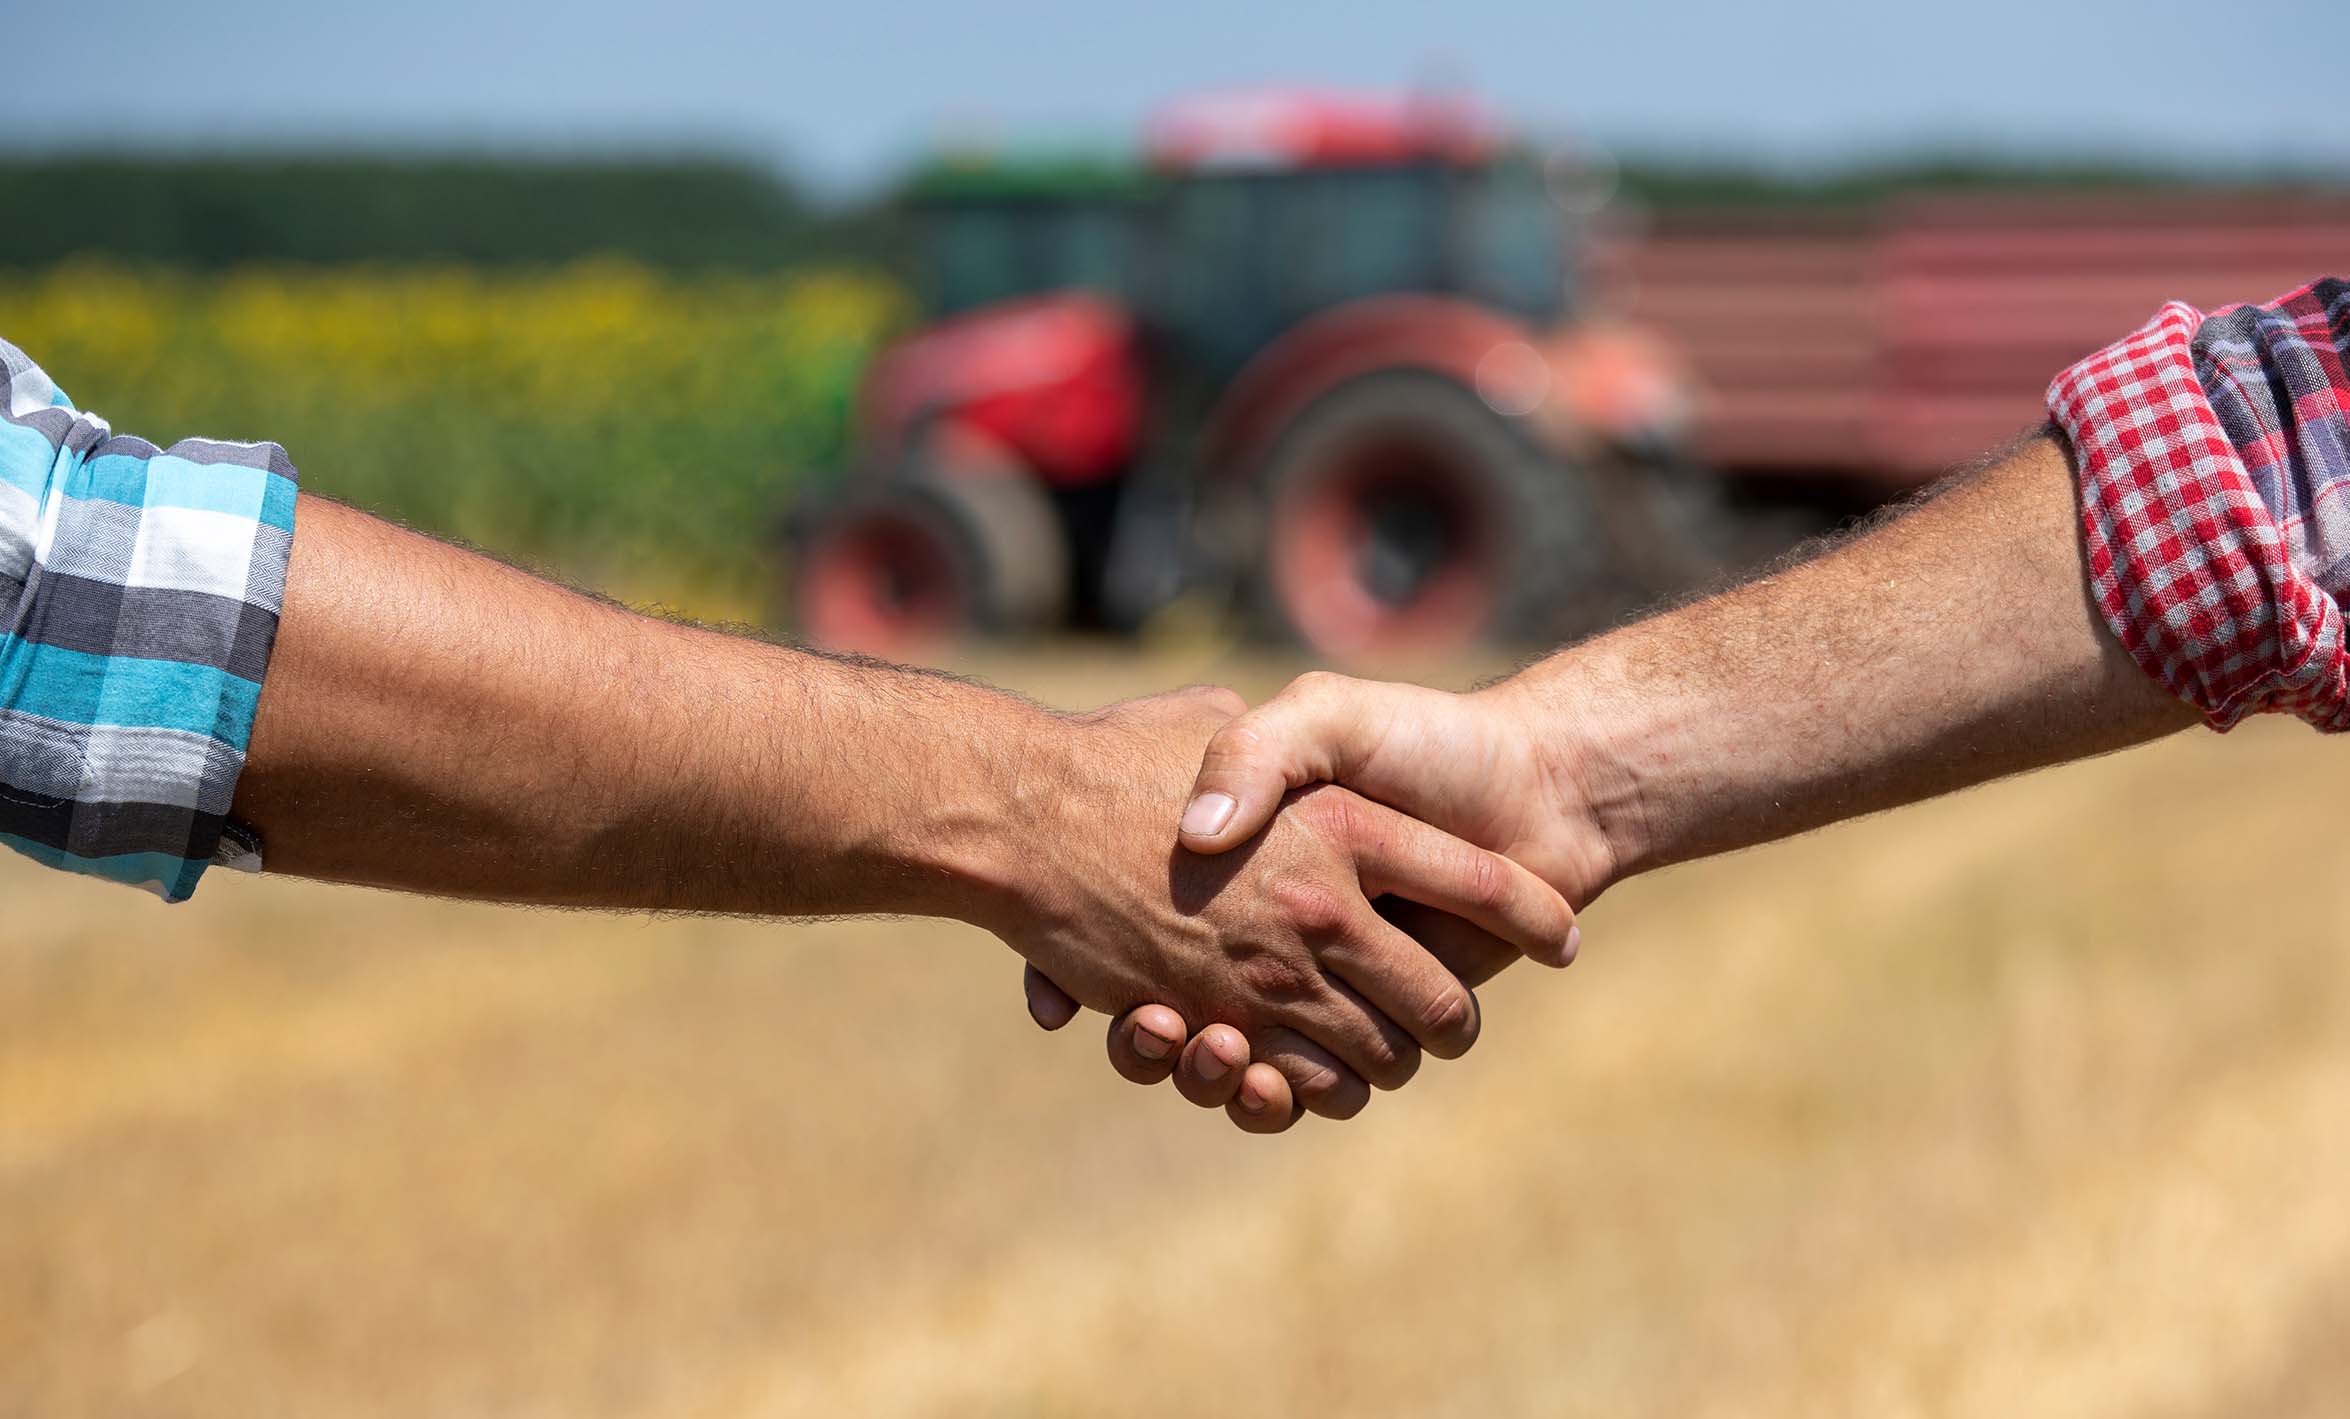 Farmers shaking hands in field in front of tractor with trailer during wheat harvest in summer time